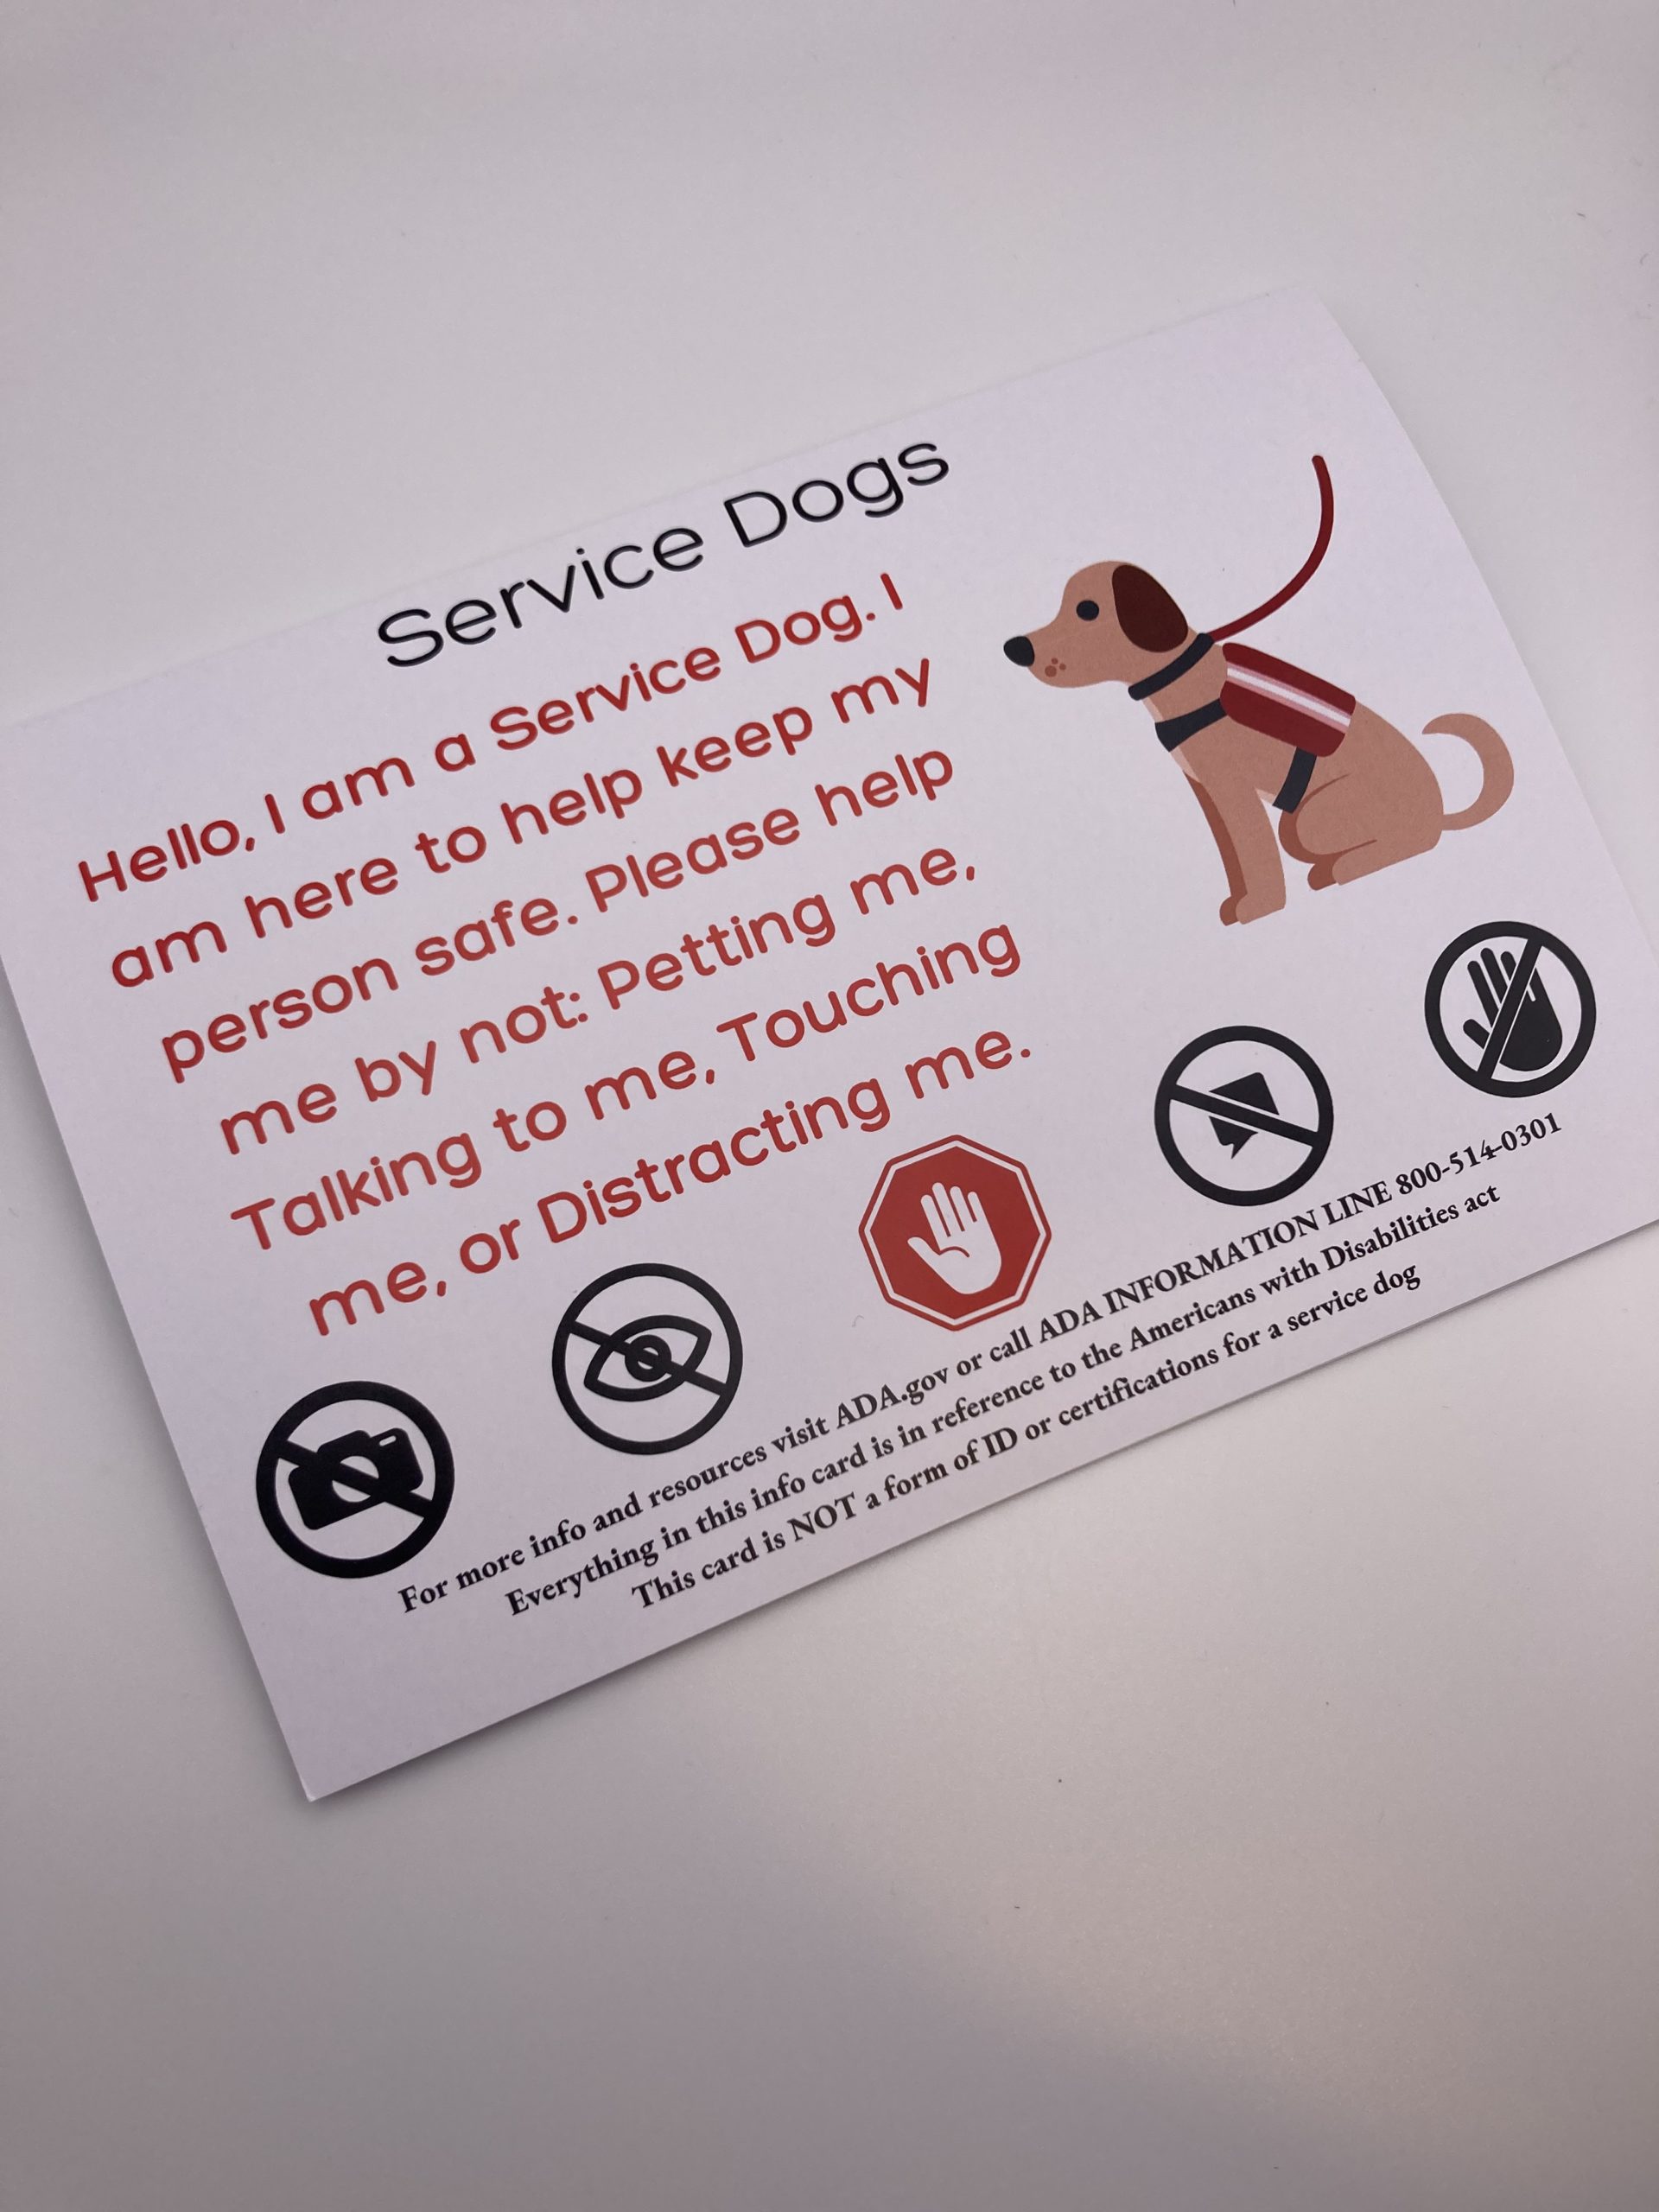 What Makes A Service Dog Legal